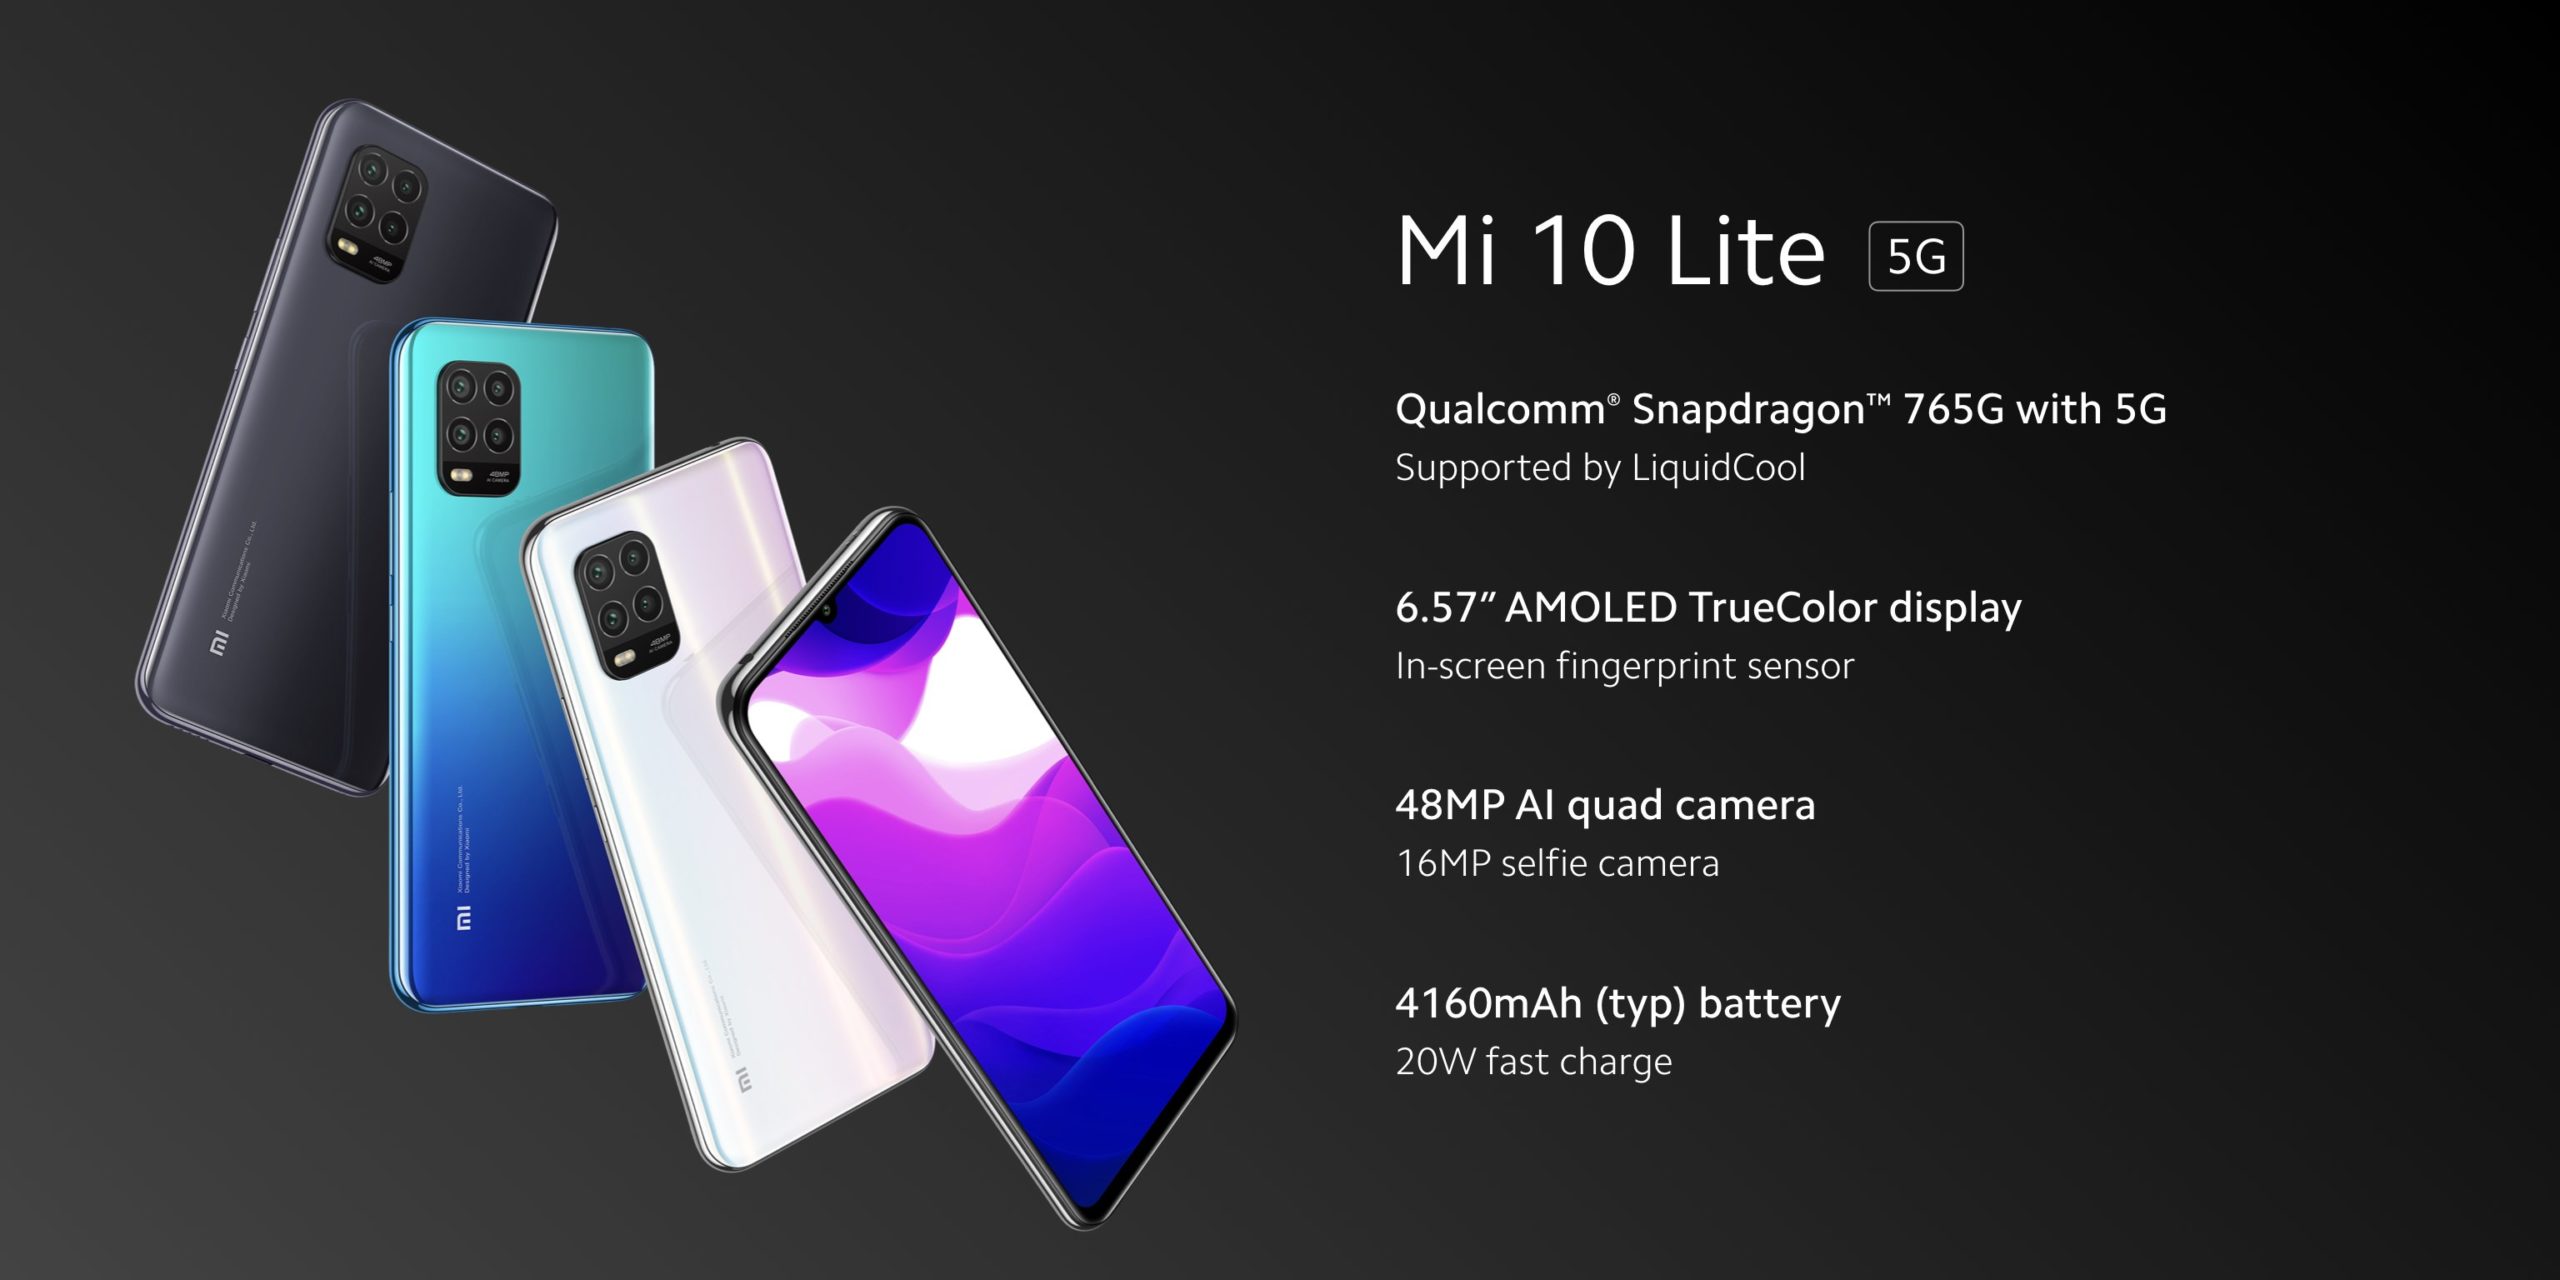 Xiaomi Mi 10 Lite 5G announced in Europe with a Snapdragon 765G